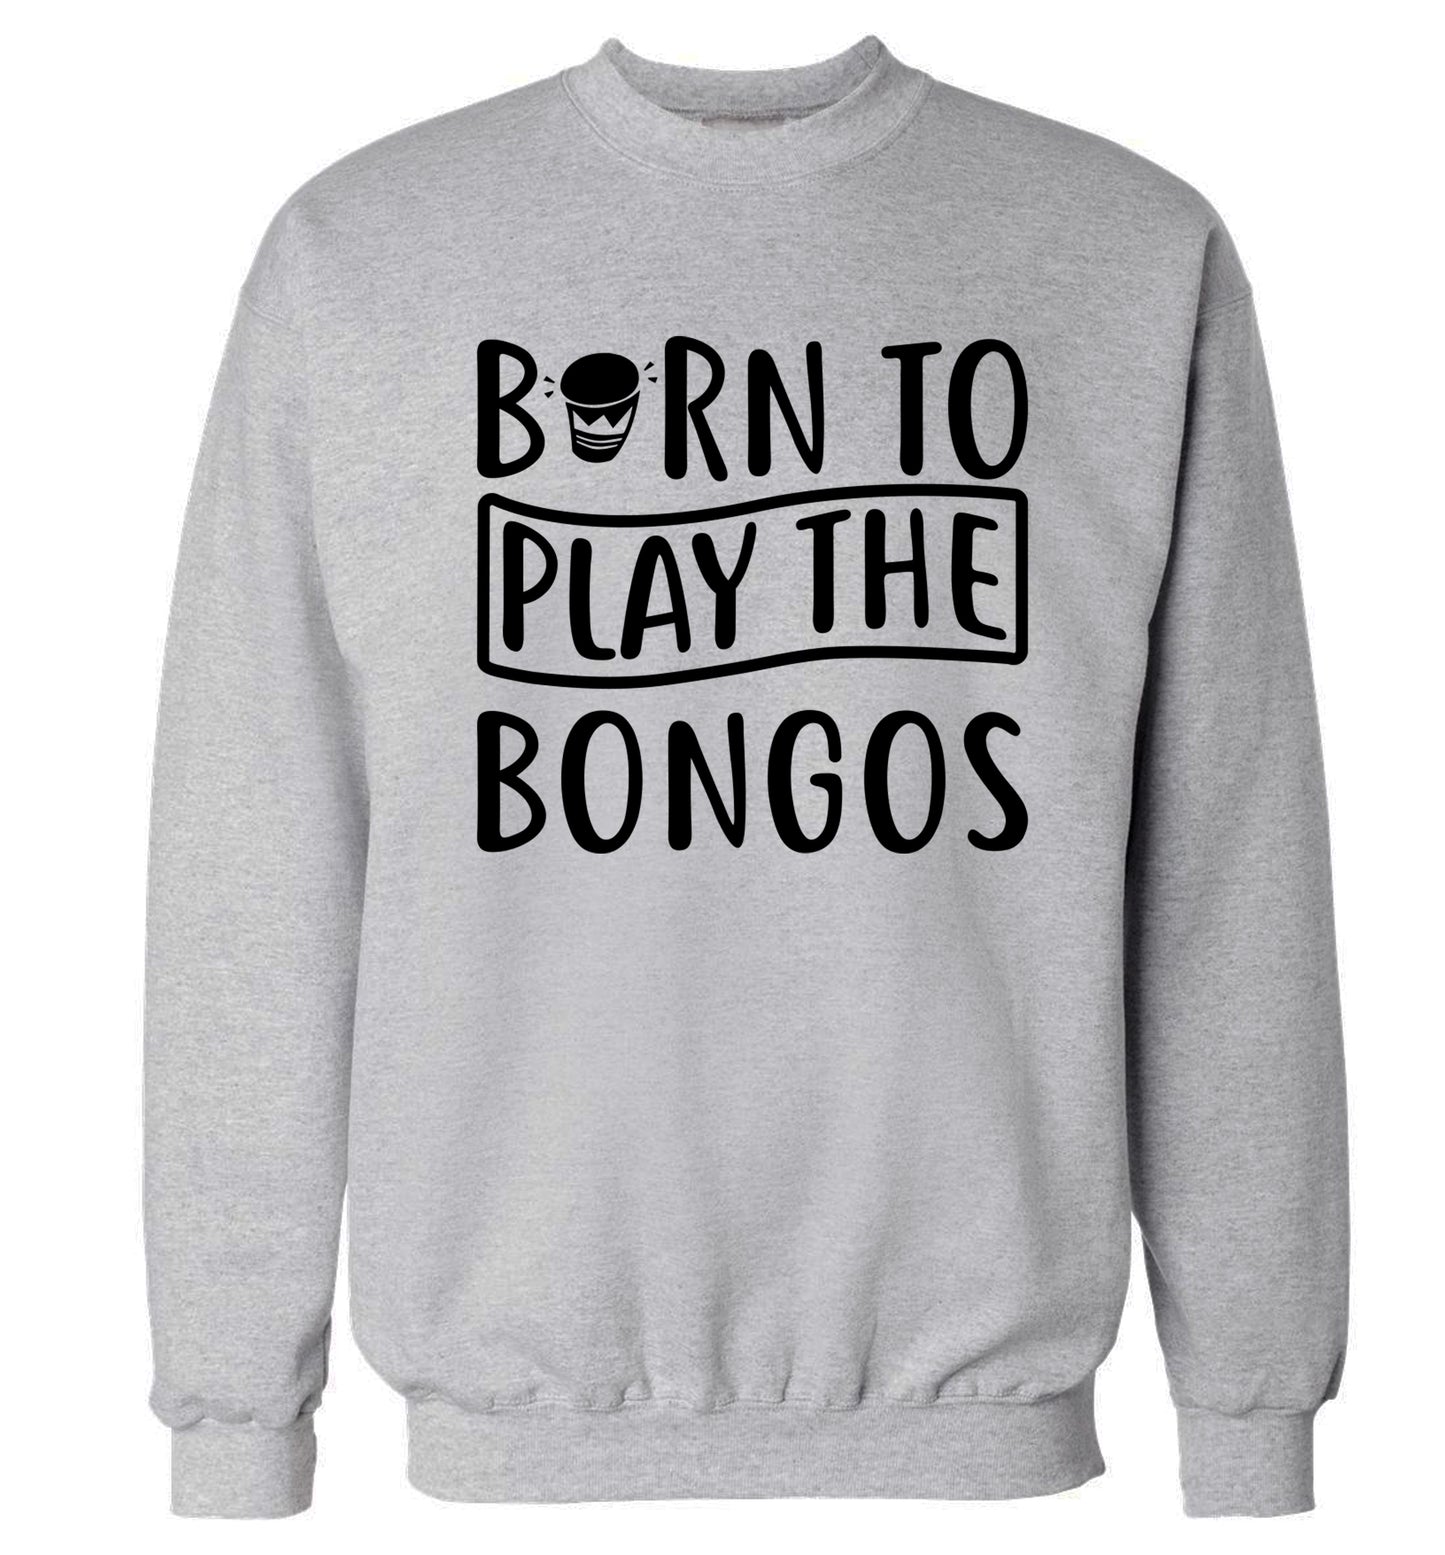 Born to play the bongos Adult's unisex grey Sweater 2XL